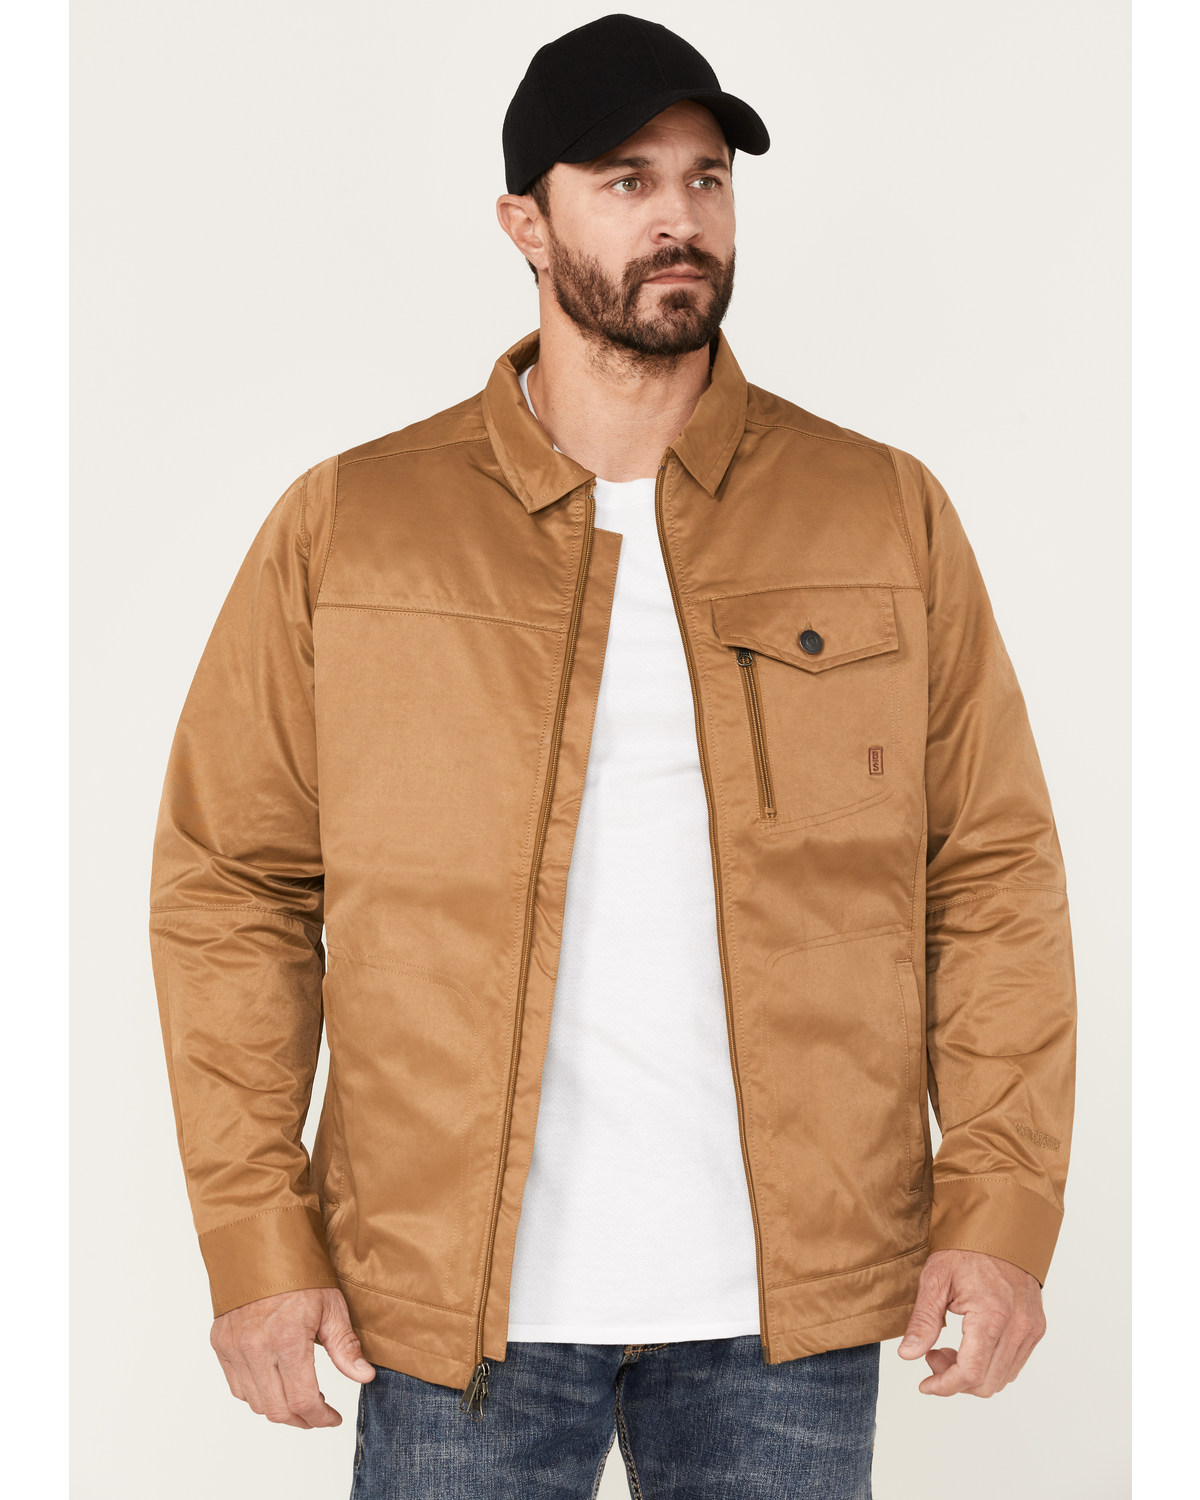 Brothers and Sons Men's Badlands Trucker Jacket